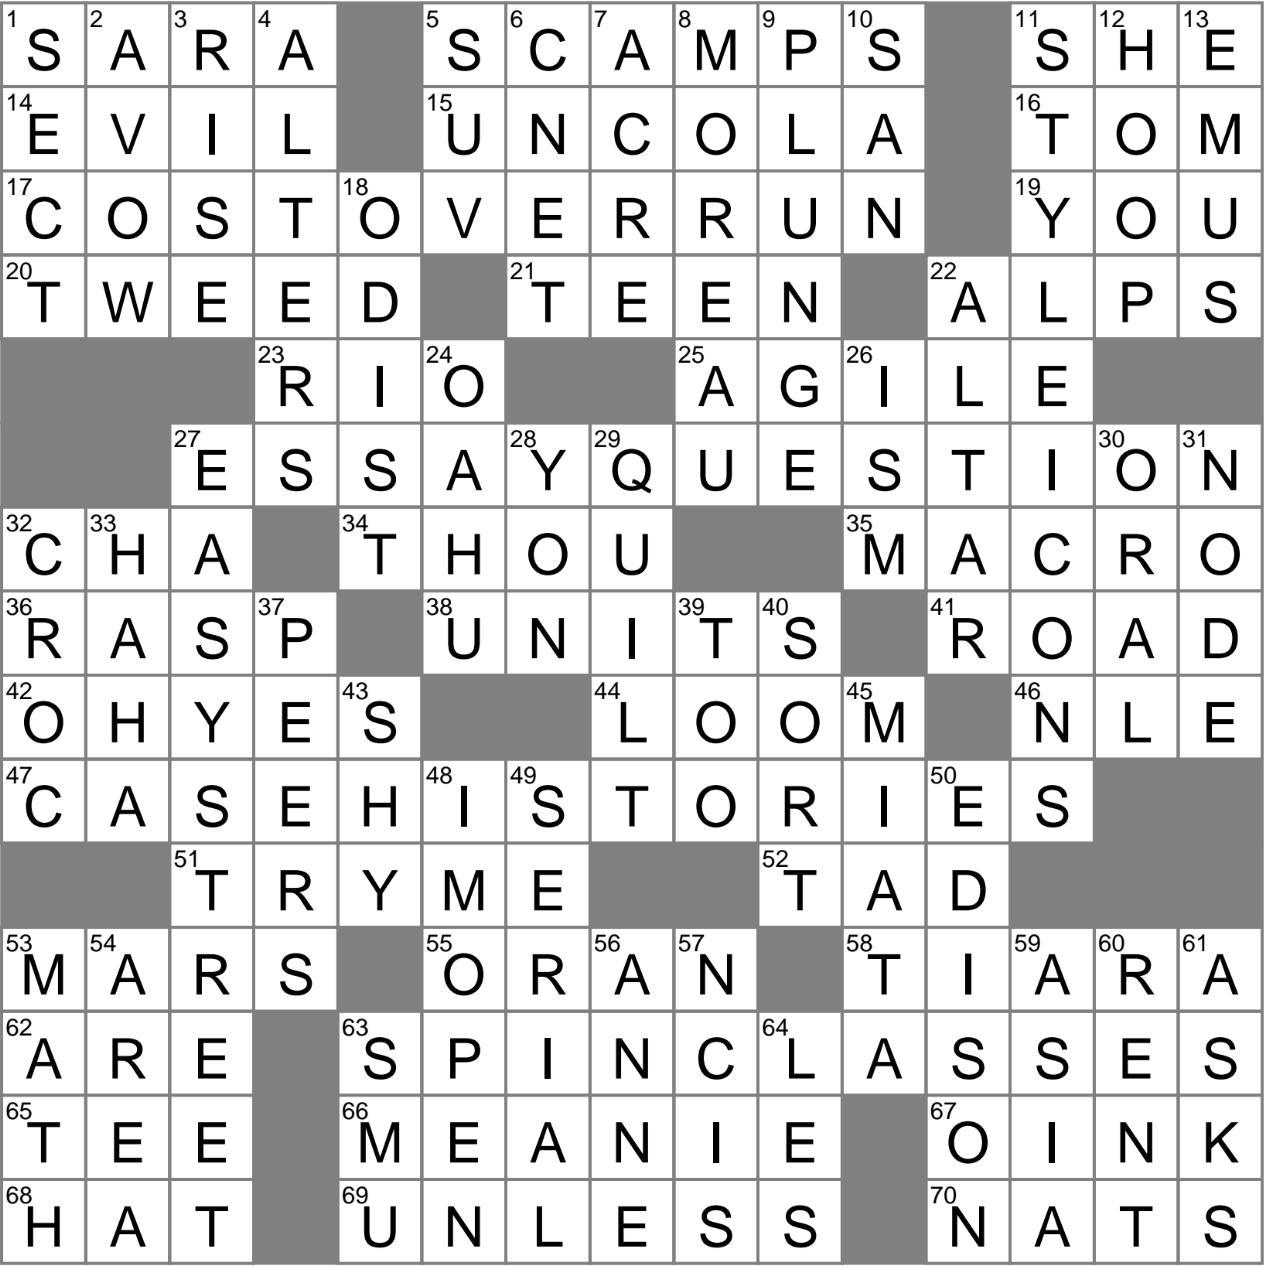 Billy Porter and Lady Gaga for two crossword clue Archives